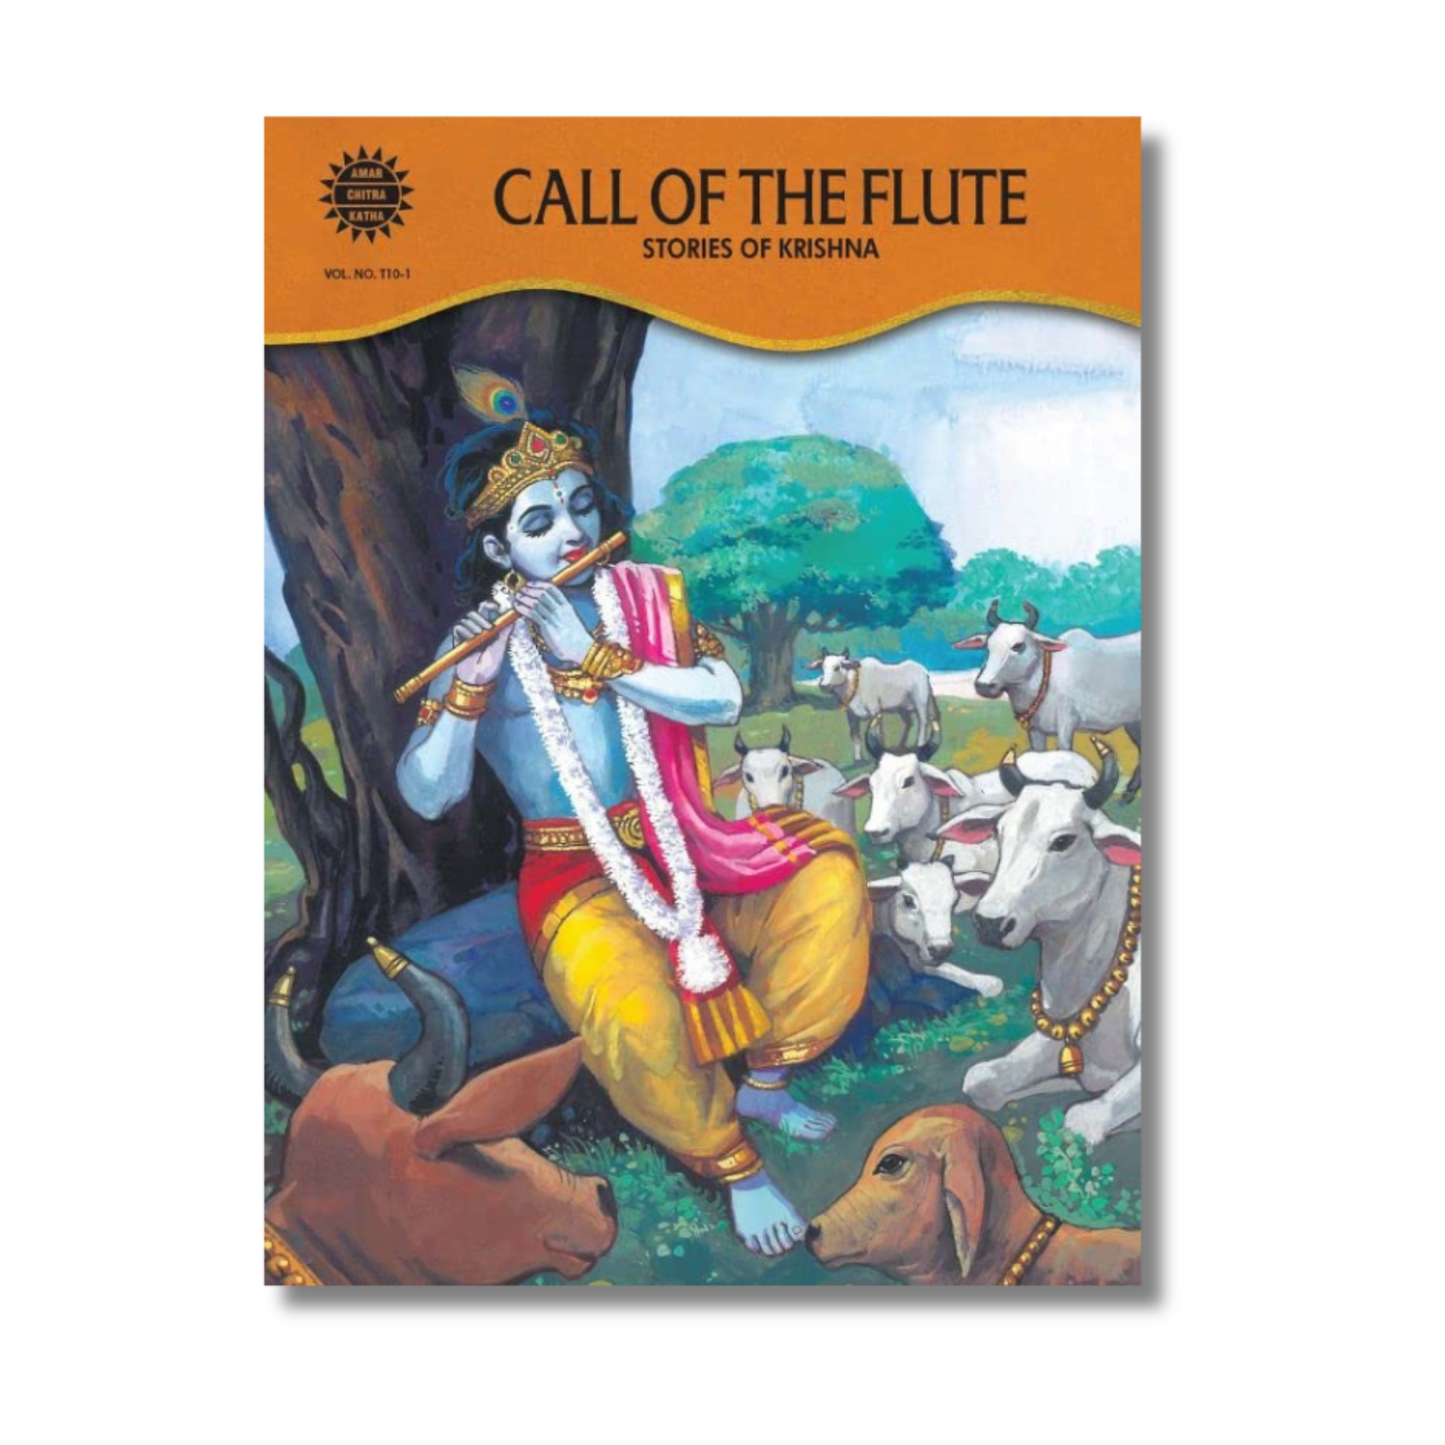 Call Of The Flute By Amar Chitra Katha (Hardcover)